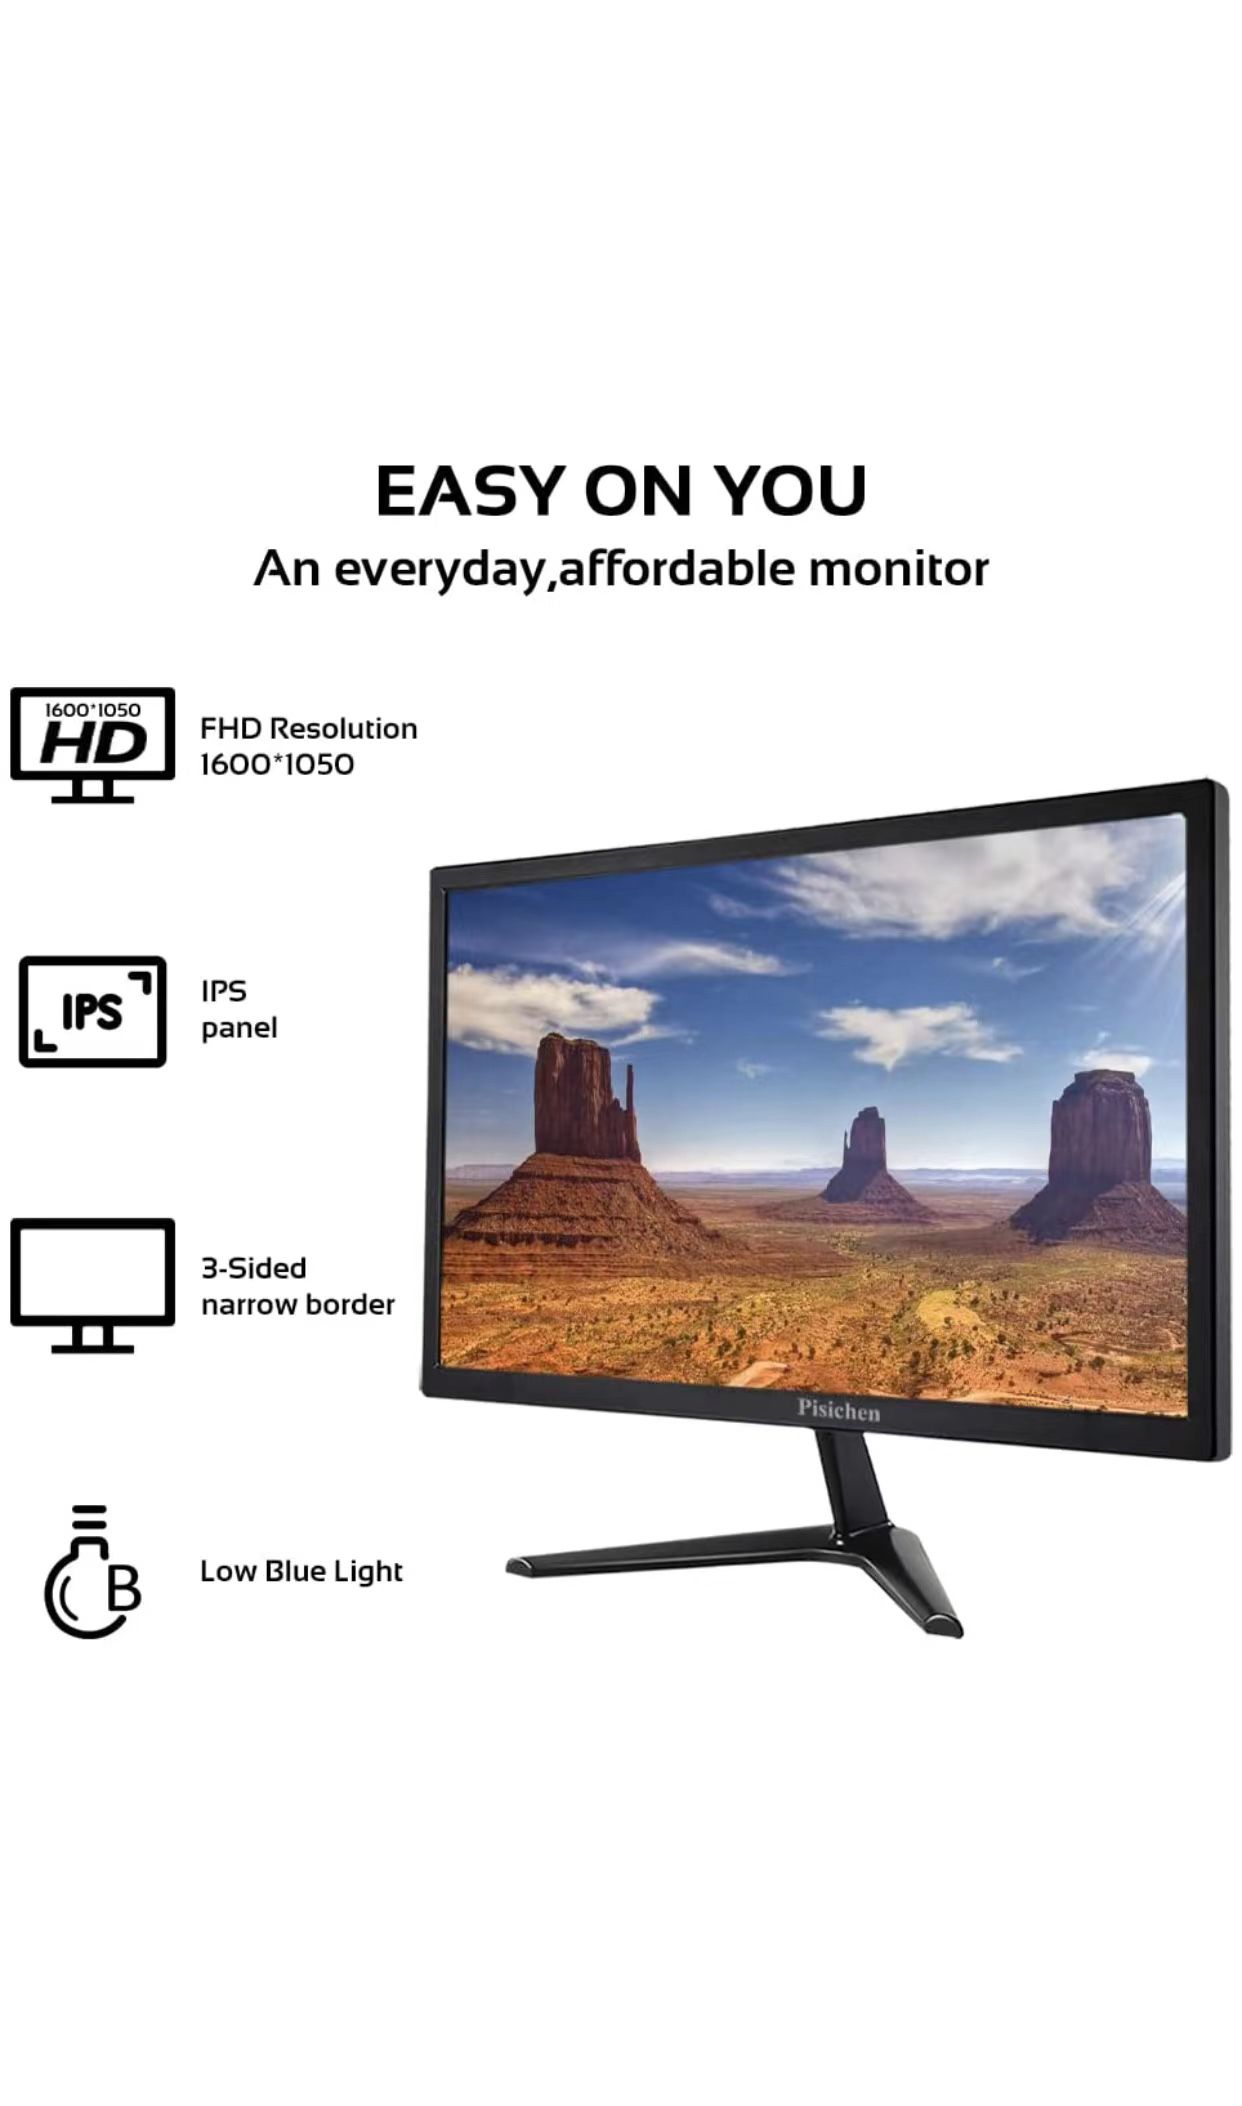 Wet en regelgeving Klusjesman Toegeven Computer Monitor, 22 Inch PC Monitor HD 1600x1050, Gaming Monitor with HDMI  & VGA Interface for Sale in Corona, CA - OfferUp